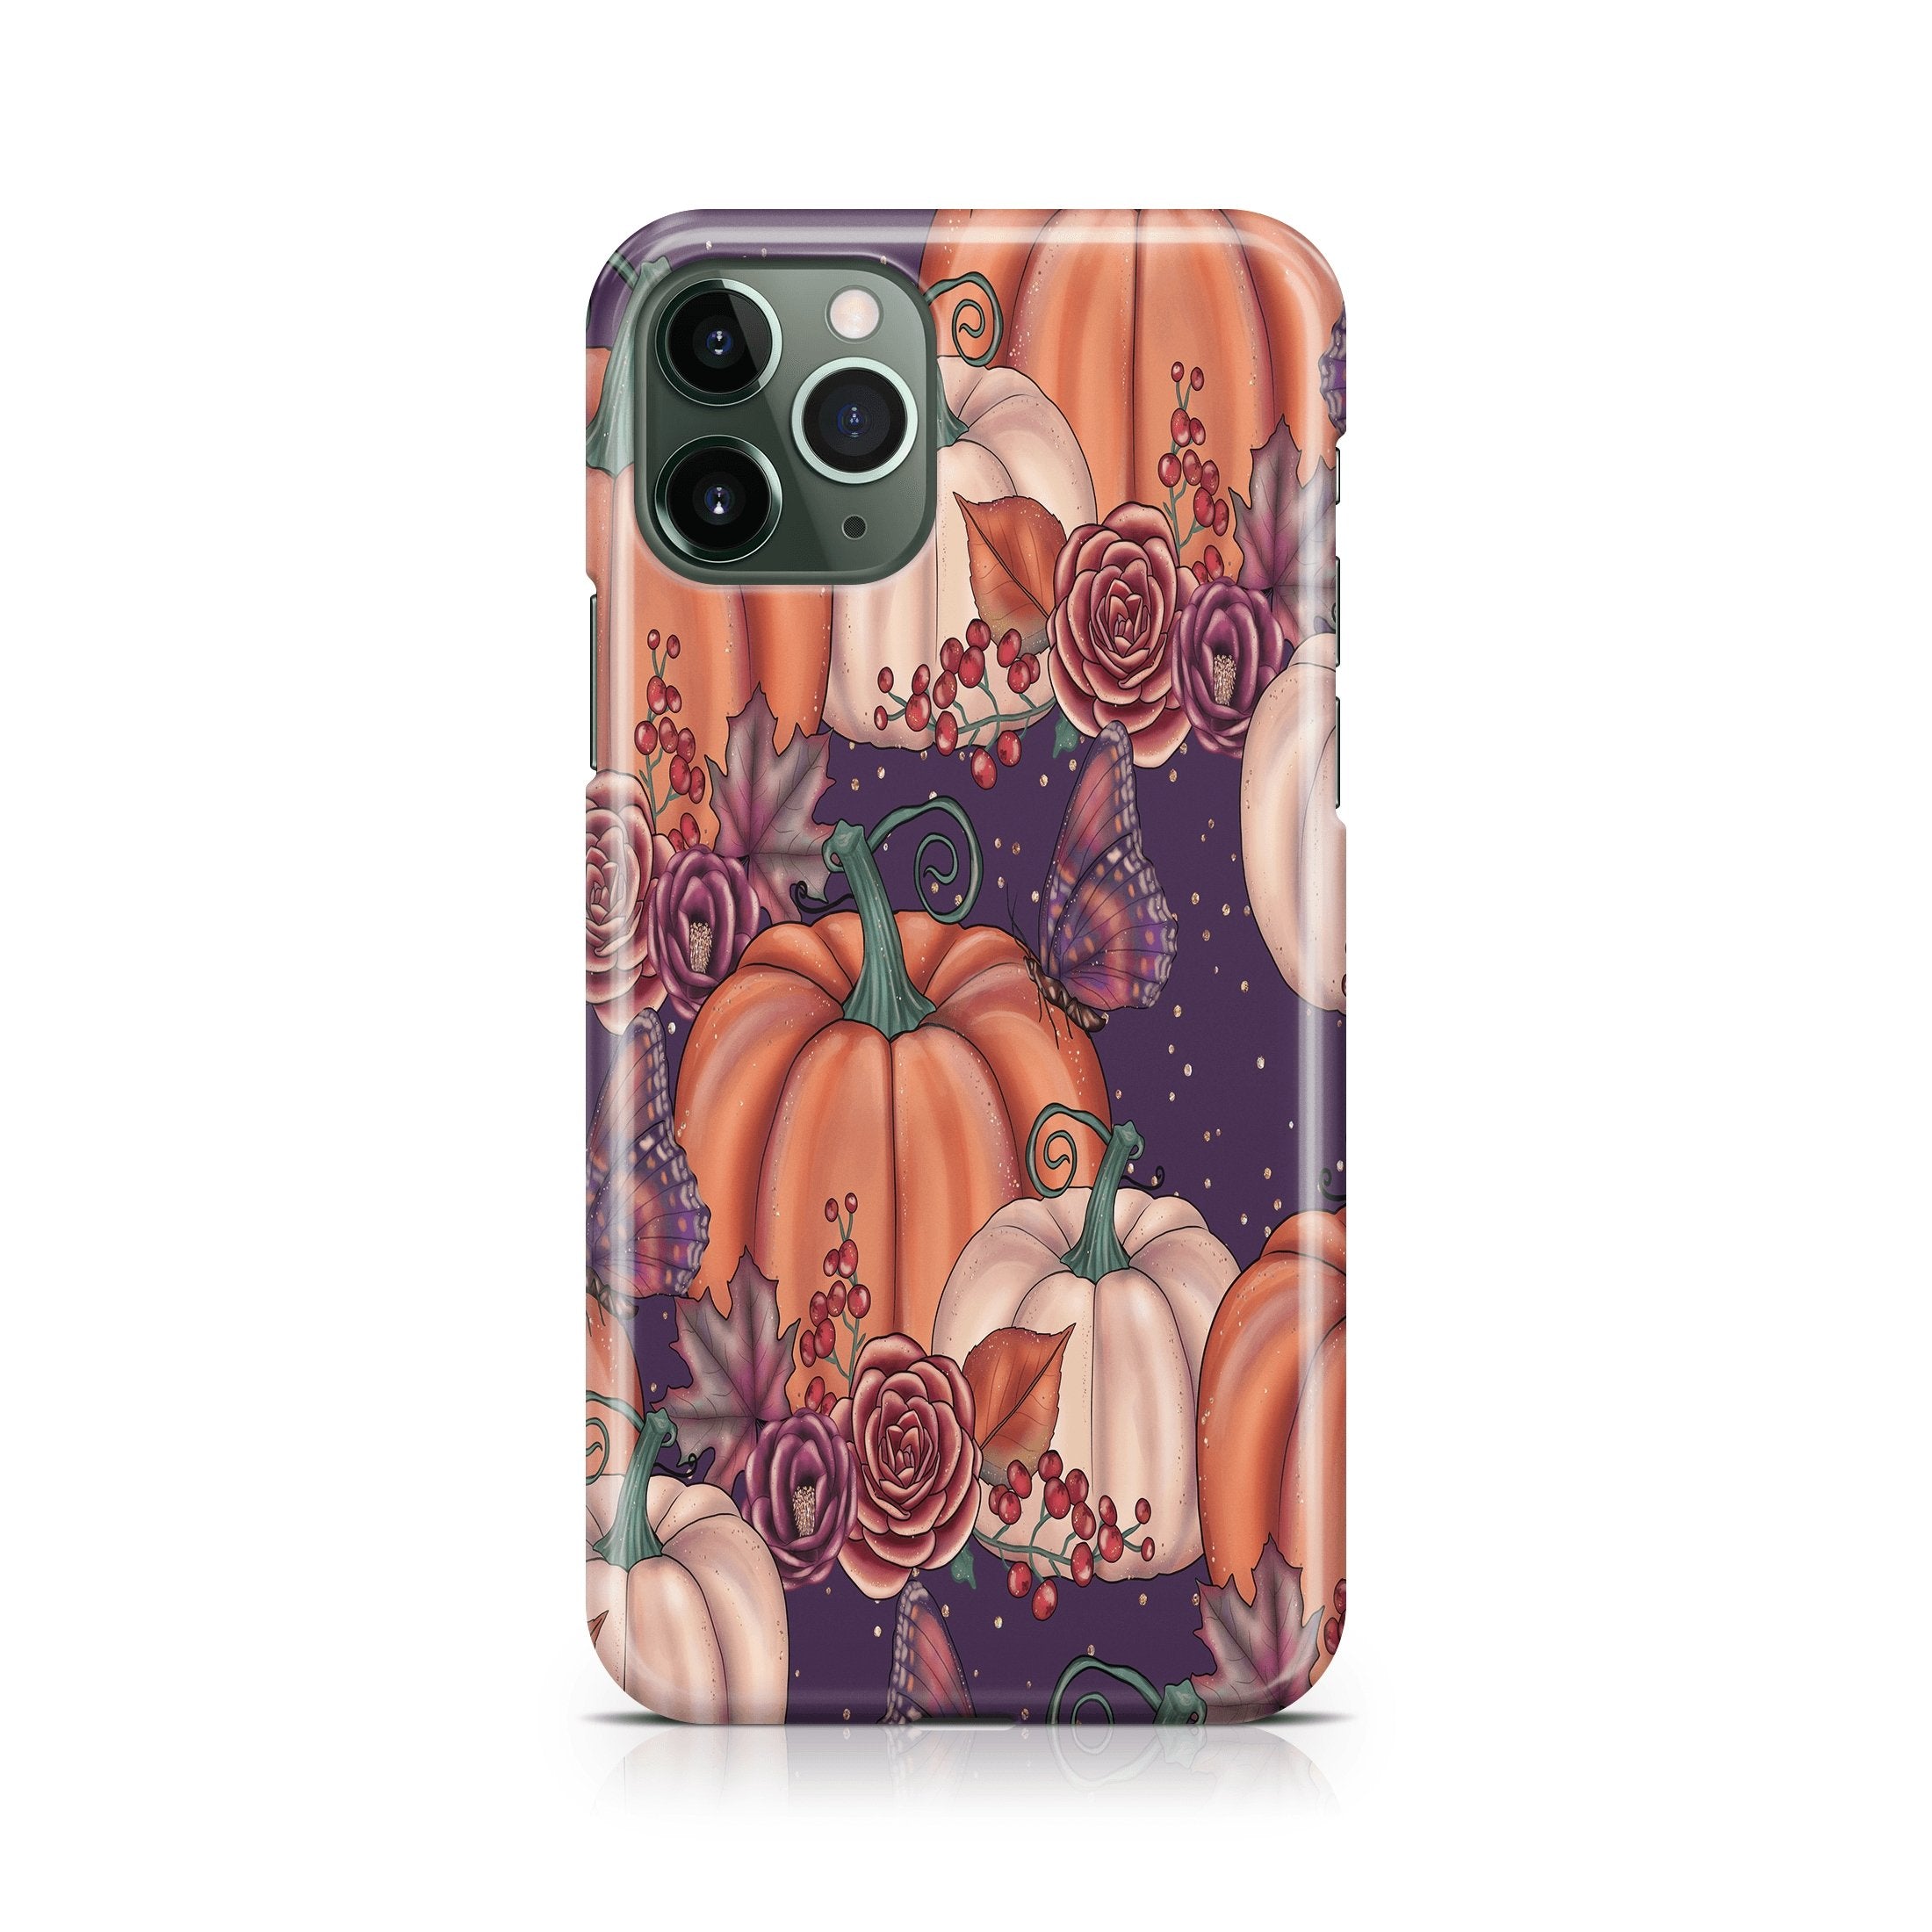 Autumn Pumpkin - iPhone phone case designs by CaseSwagger